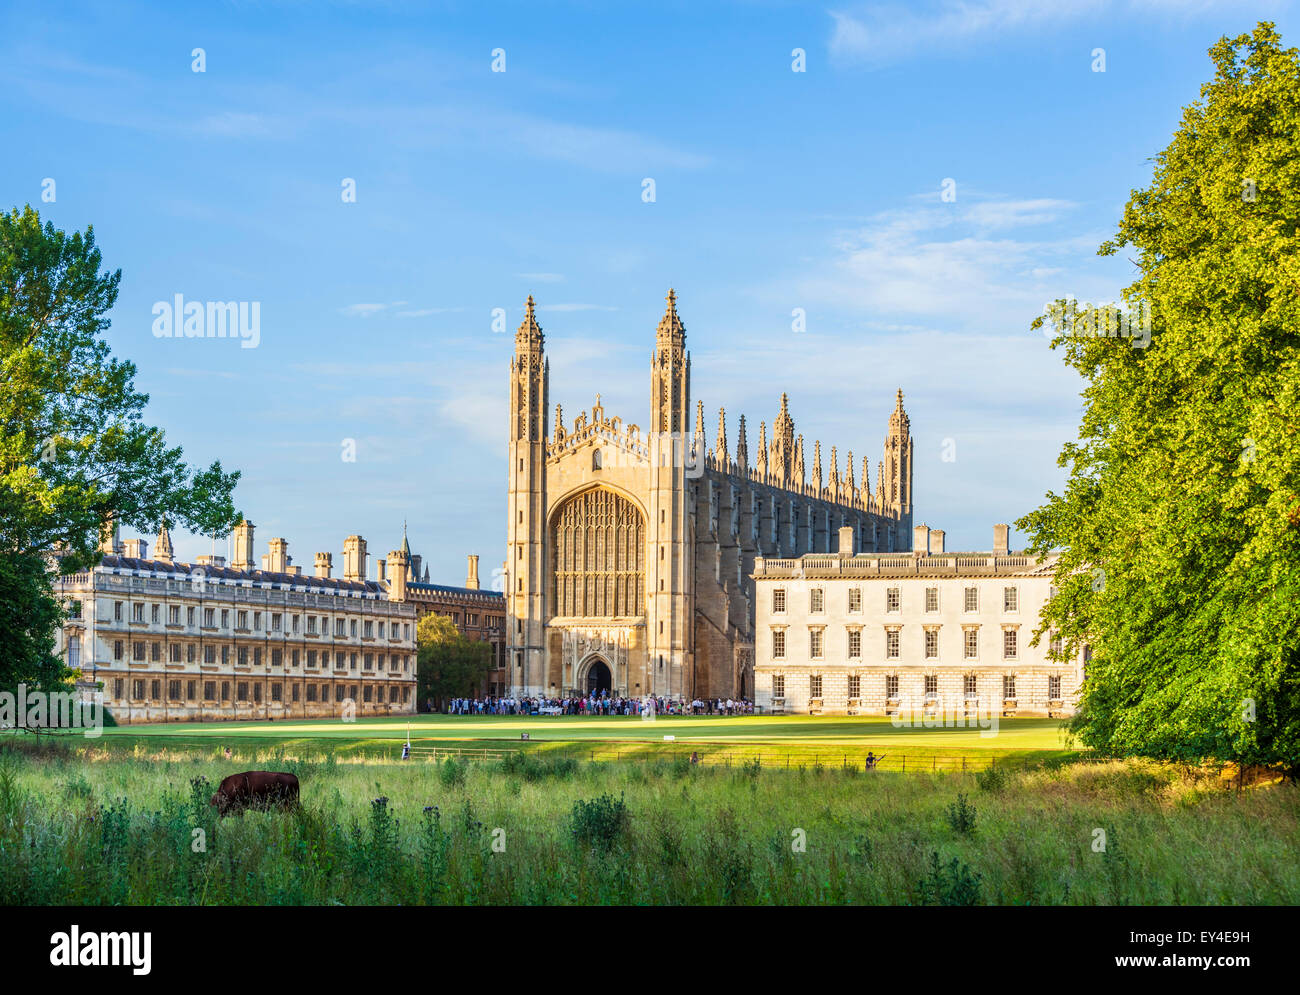 Kings College Chapel, Clare college and Gibbs Building from the Backs Cambridge University Cambridgeshire England UK GB Europe Stock Photo